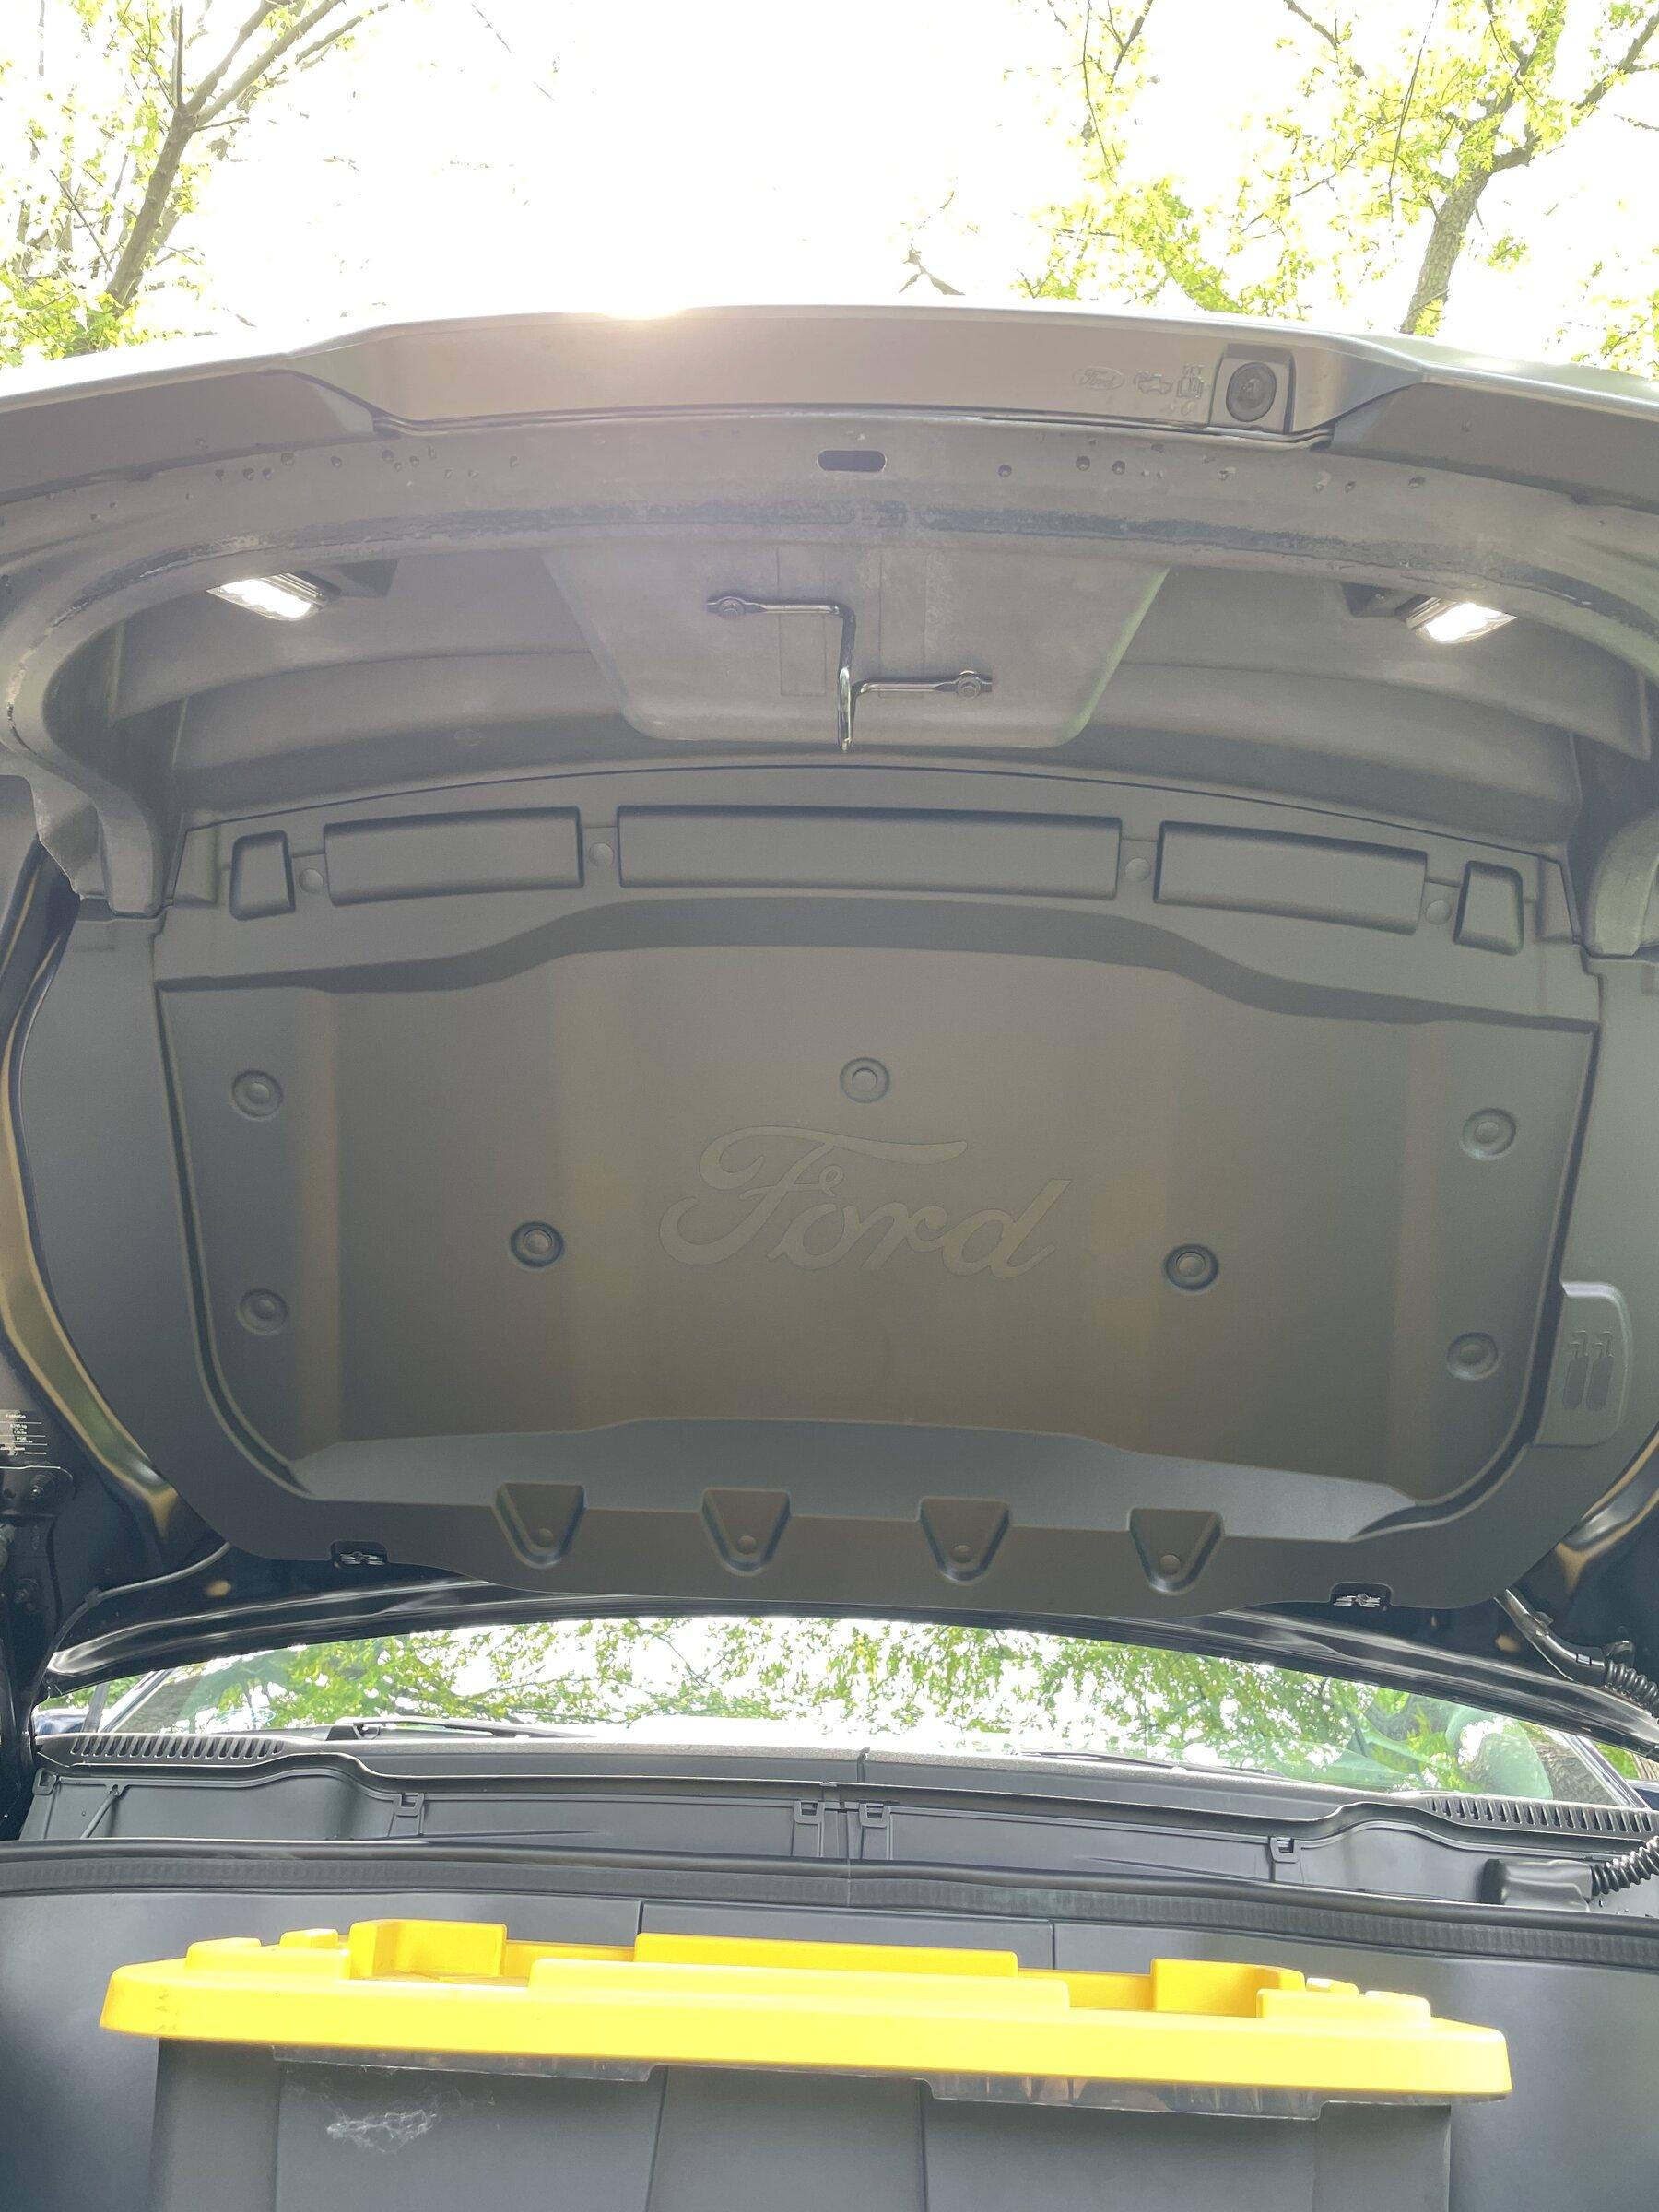 Ford F-150 Lightning What the frunk? Lightning front trunk dimensions / measurements and configurations - photos D0D9CBA2-B0C5-4D59-A39A-DBA60C1B361D